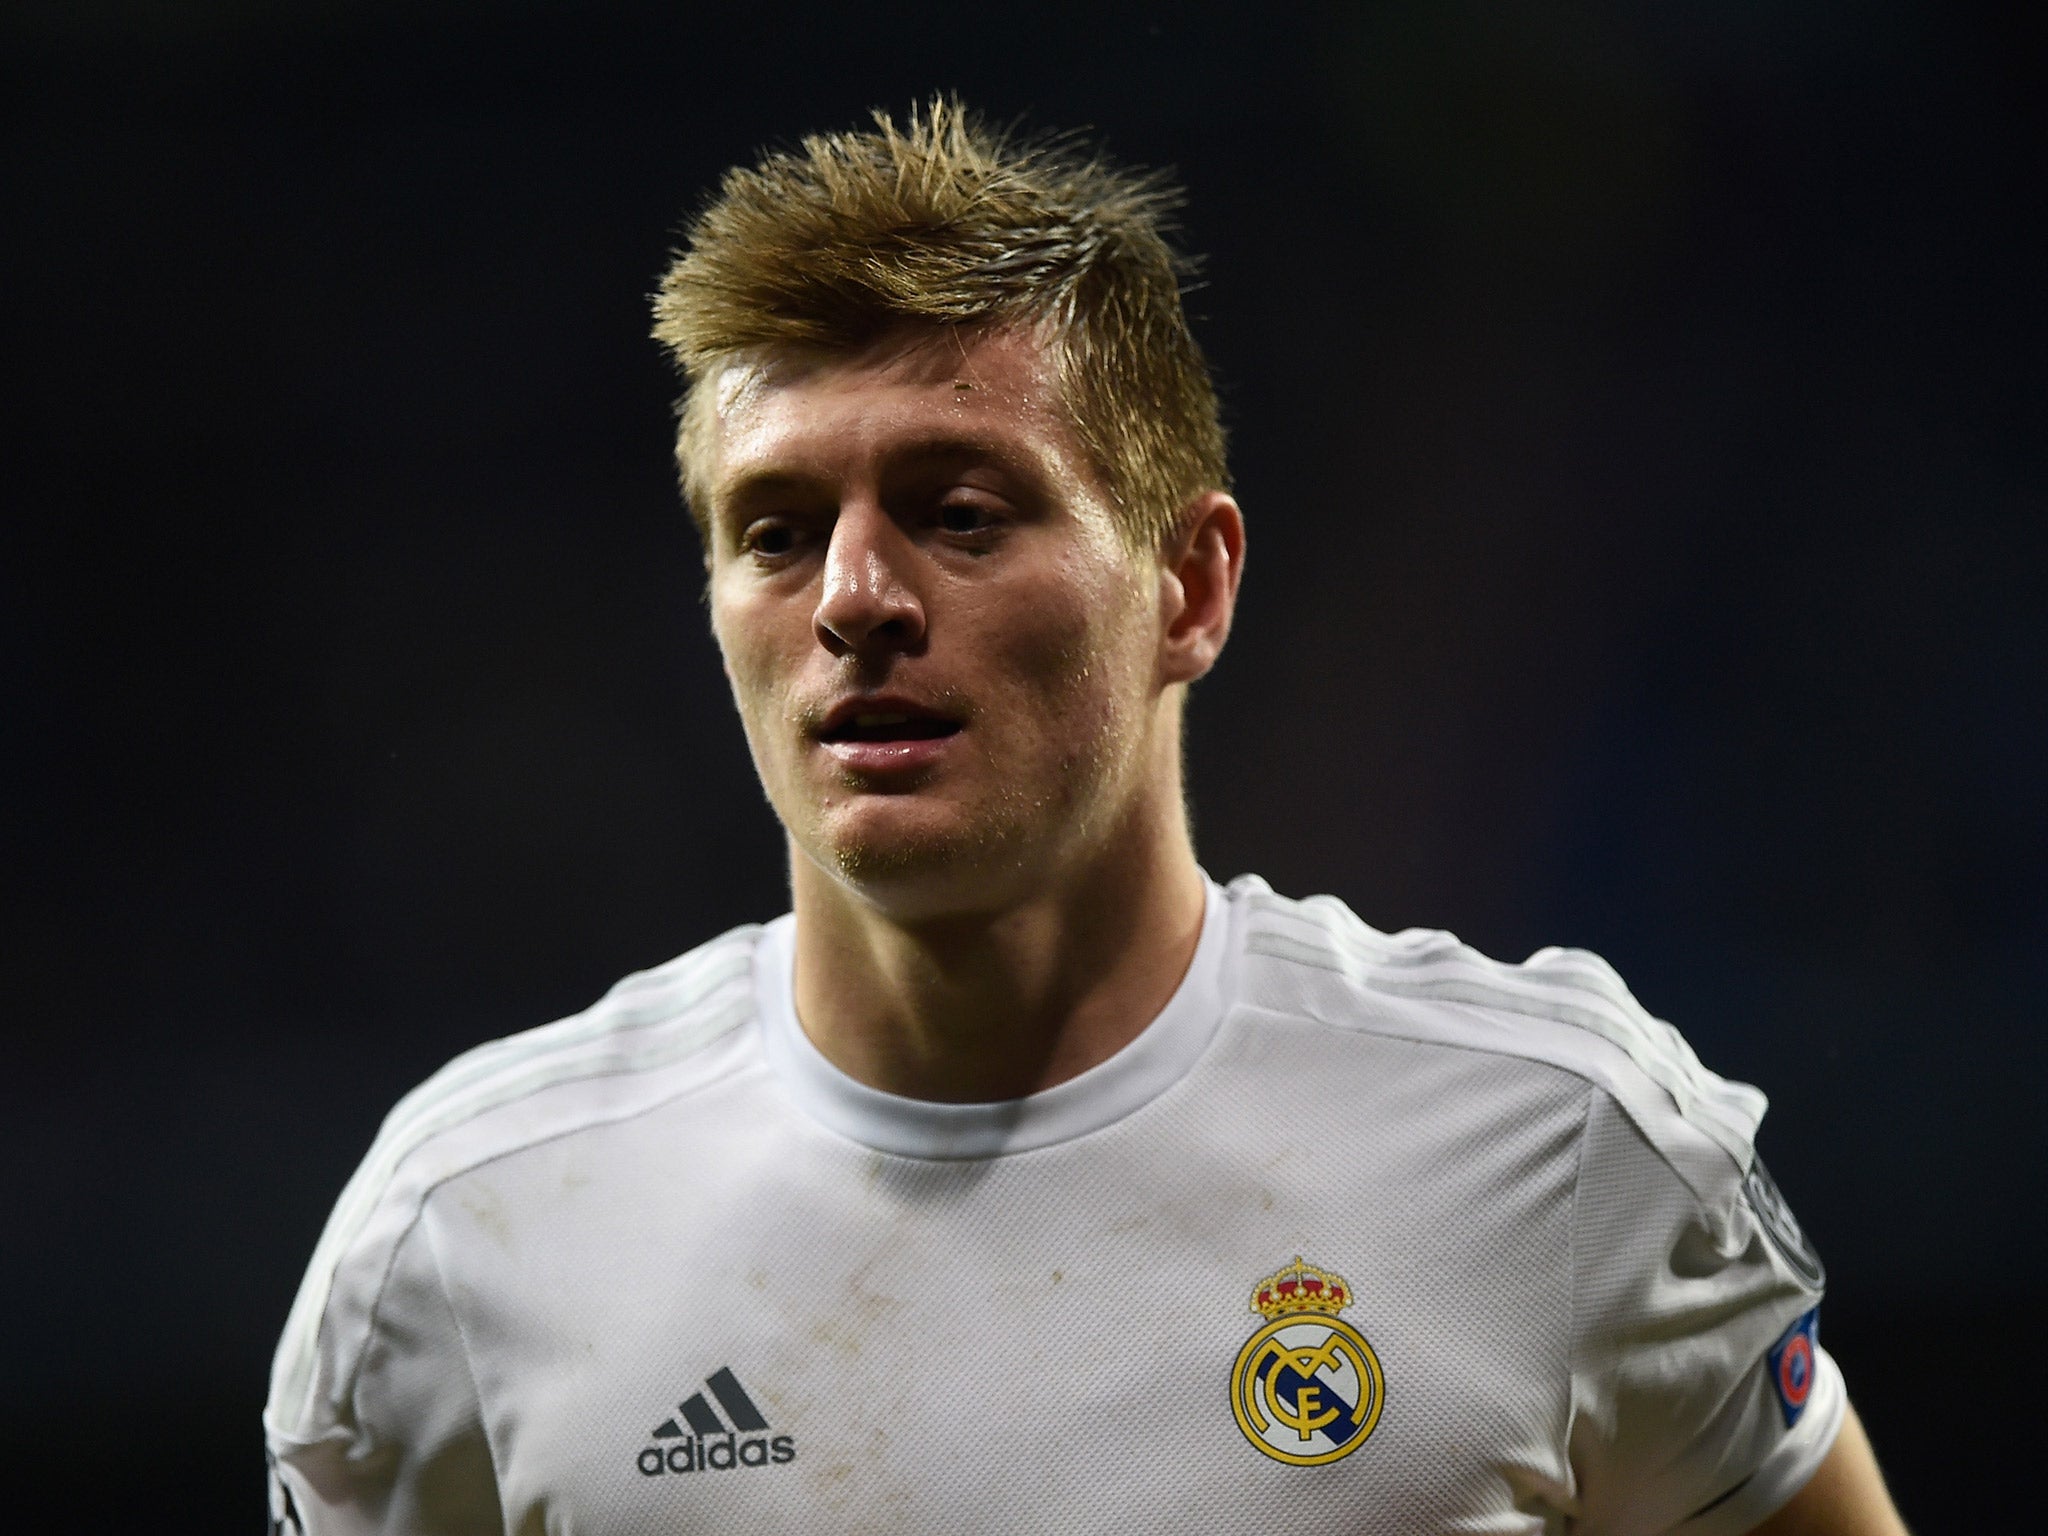 Manchester United wanted to sign Toni Kroos in 2014 when he left Bayern Munich